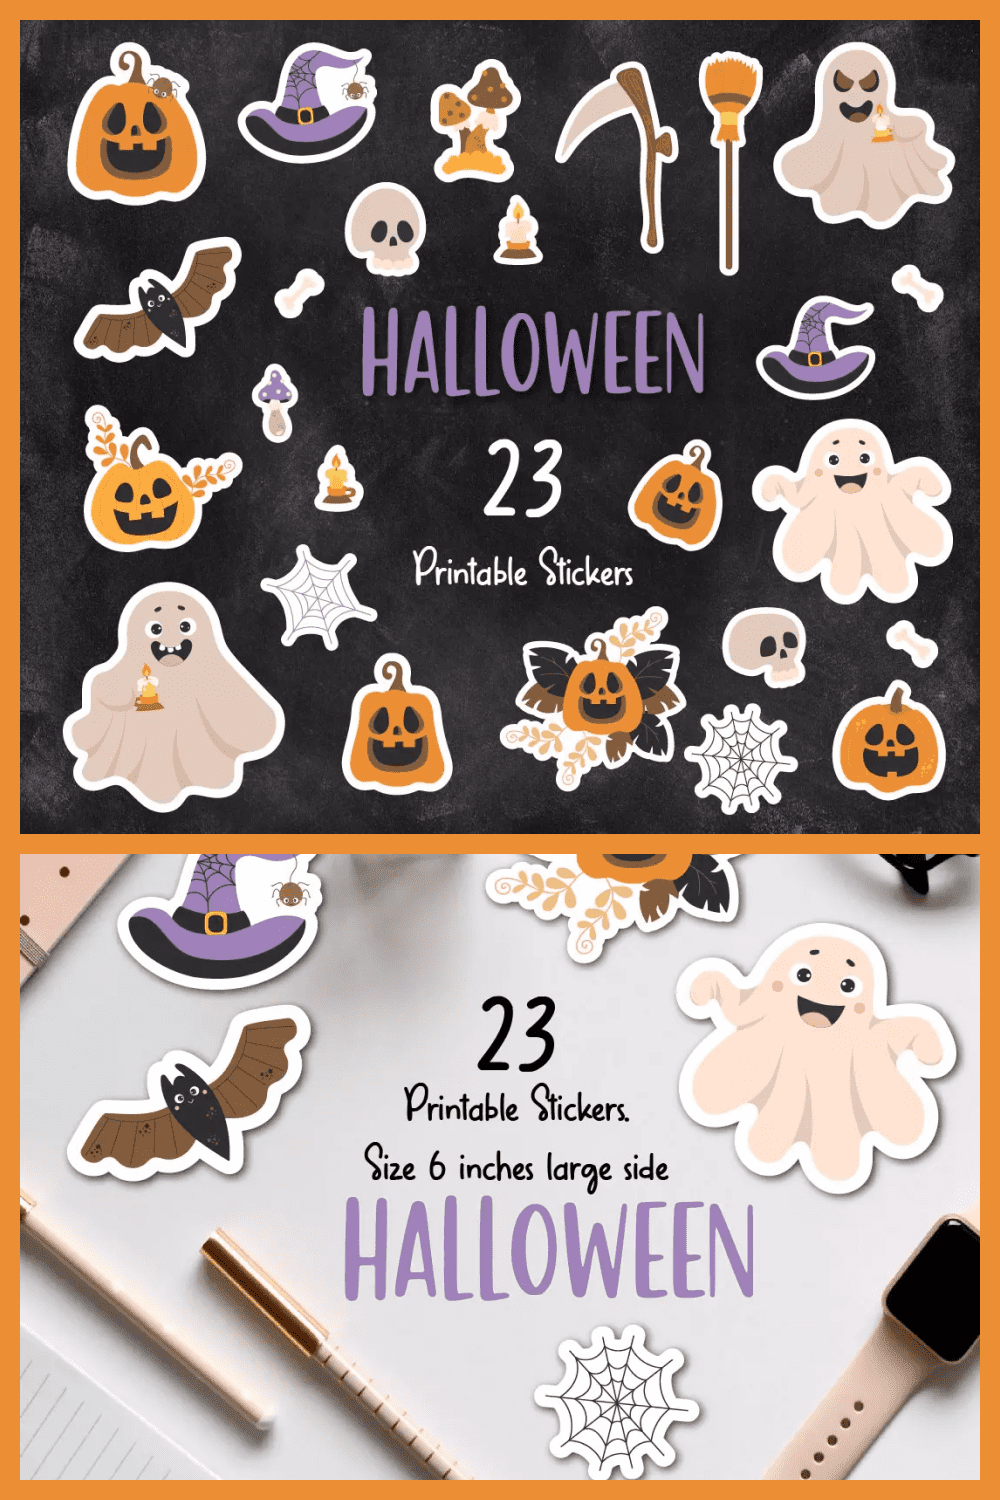 Collage of stickers of ghosts, pumpkins and skeletons on a black and white background.